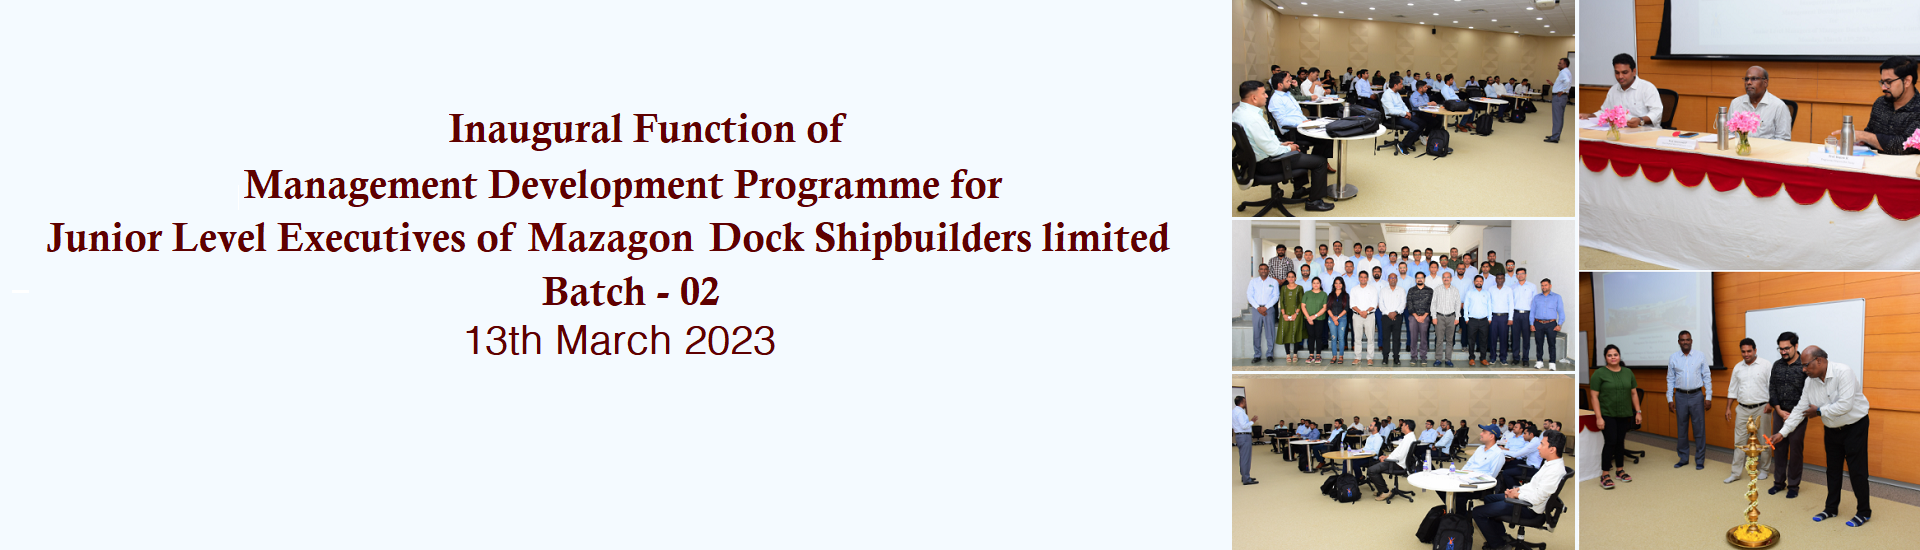 Inauguration of MDP Programme for Junior Level Executives of Mazagon Dock Shipbuliders limited - Batch 02